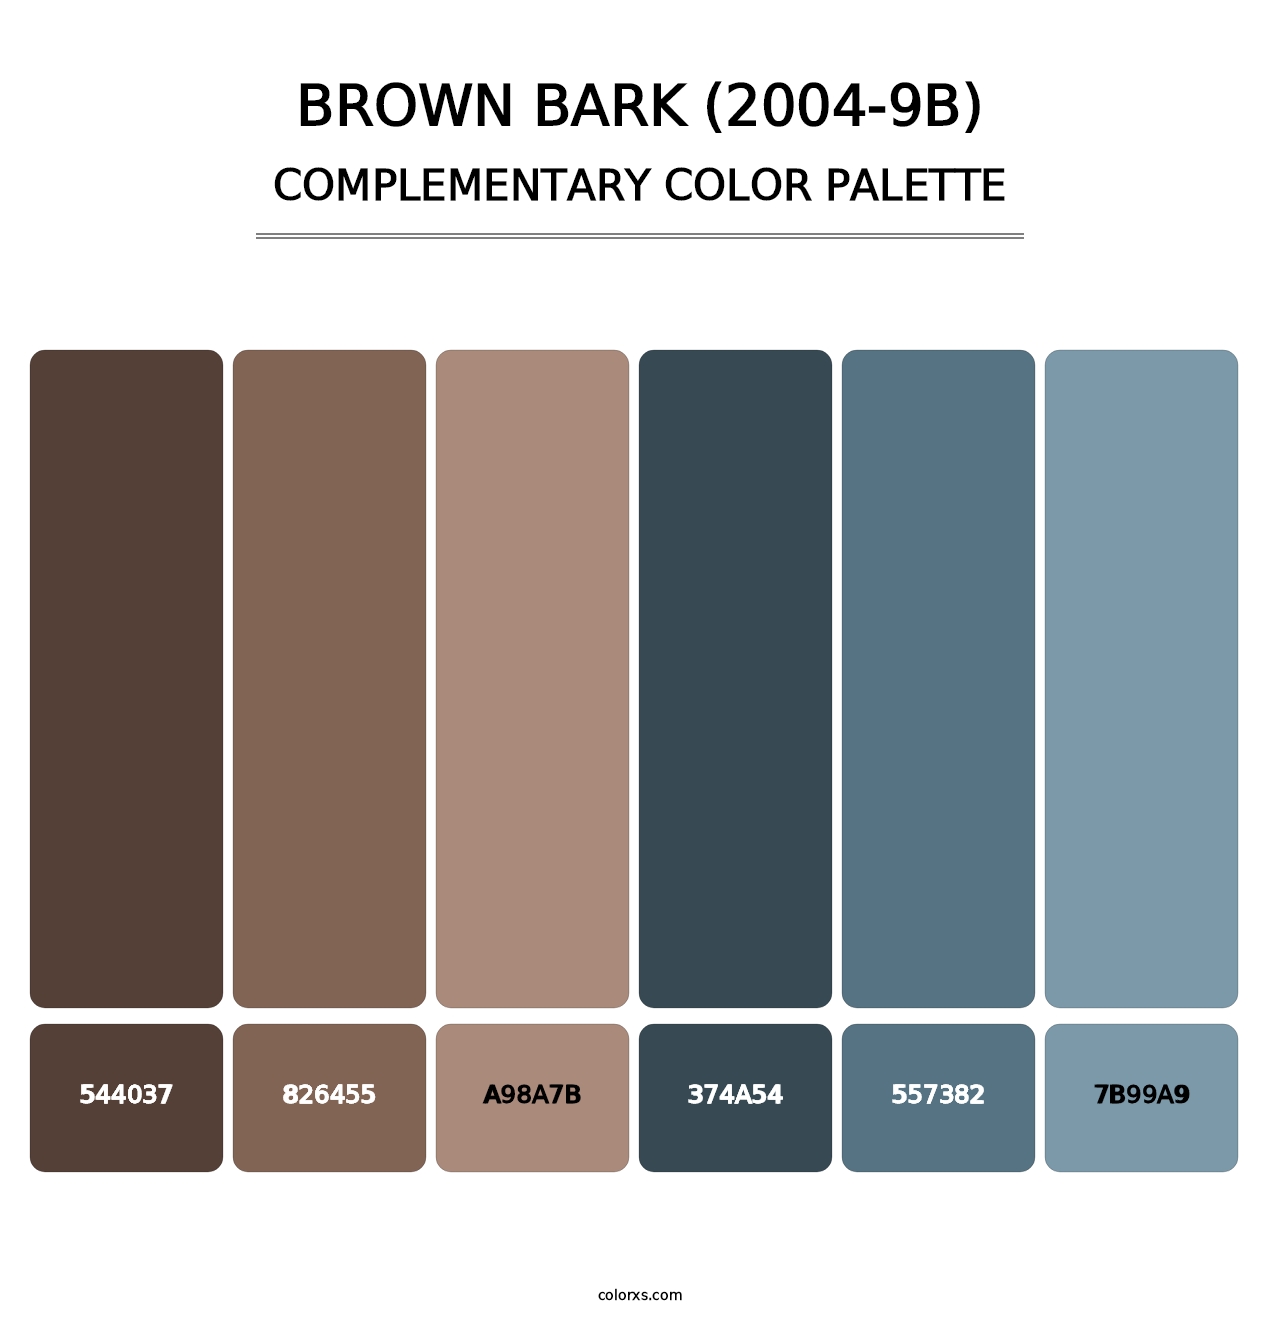 Brown Bark (2004-9B) - Complementary Color Palette